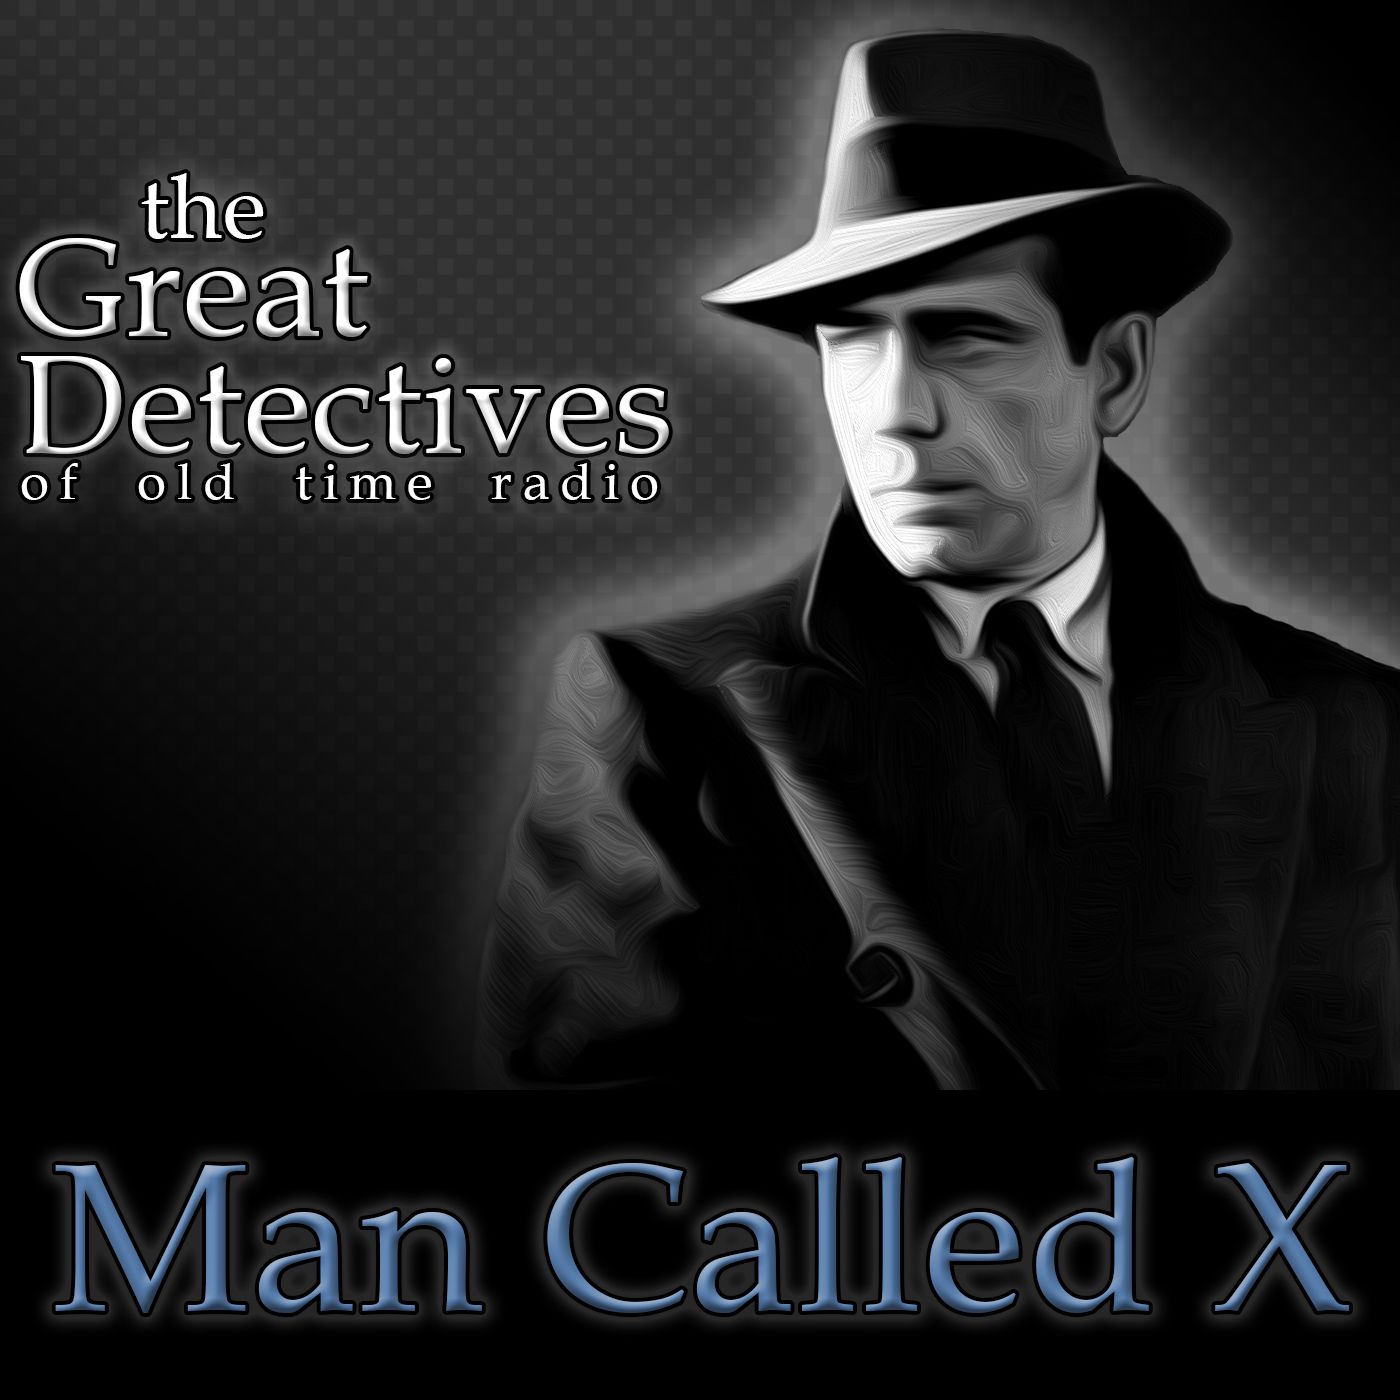 The Great Detectives Present the Man Called X (Old Time Radio)